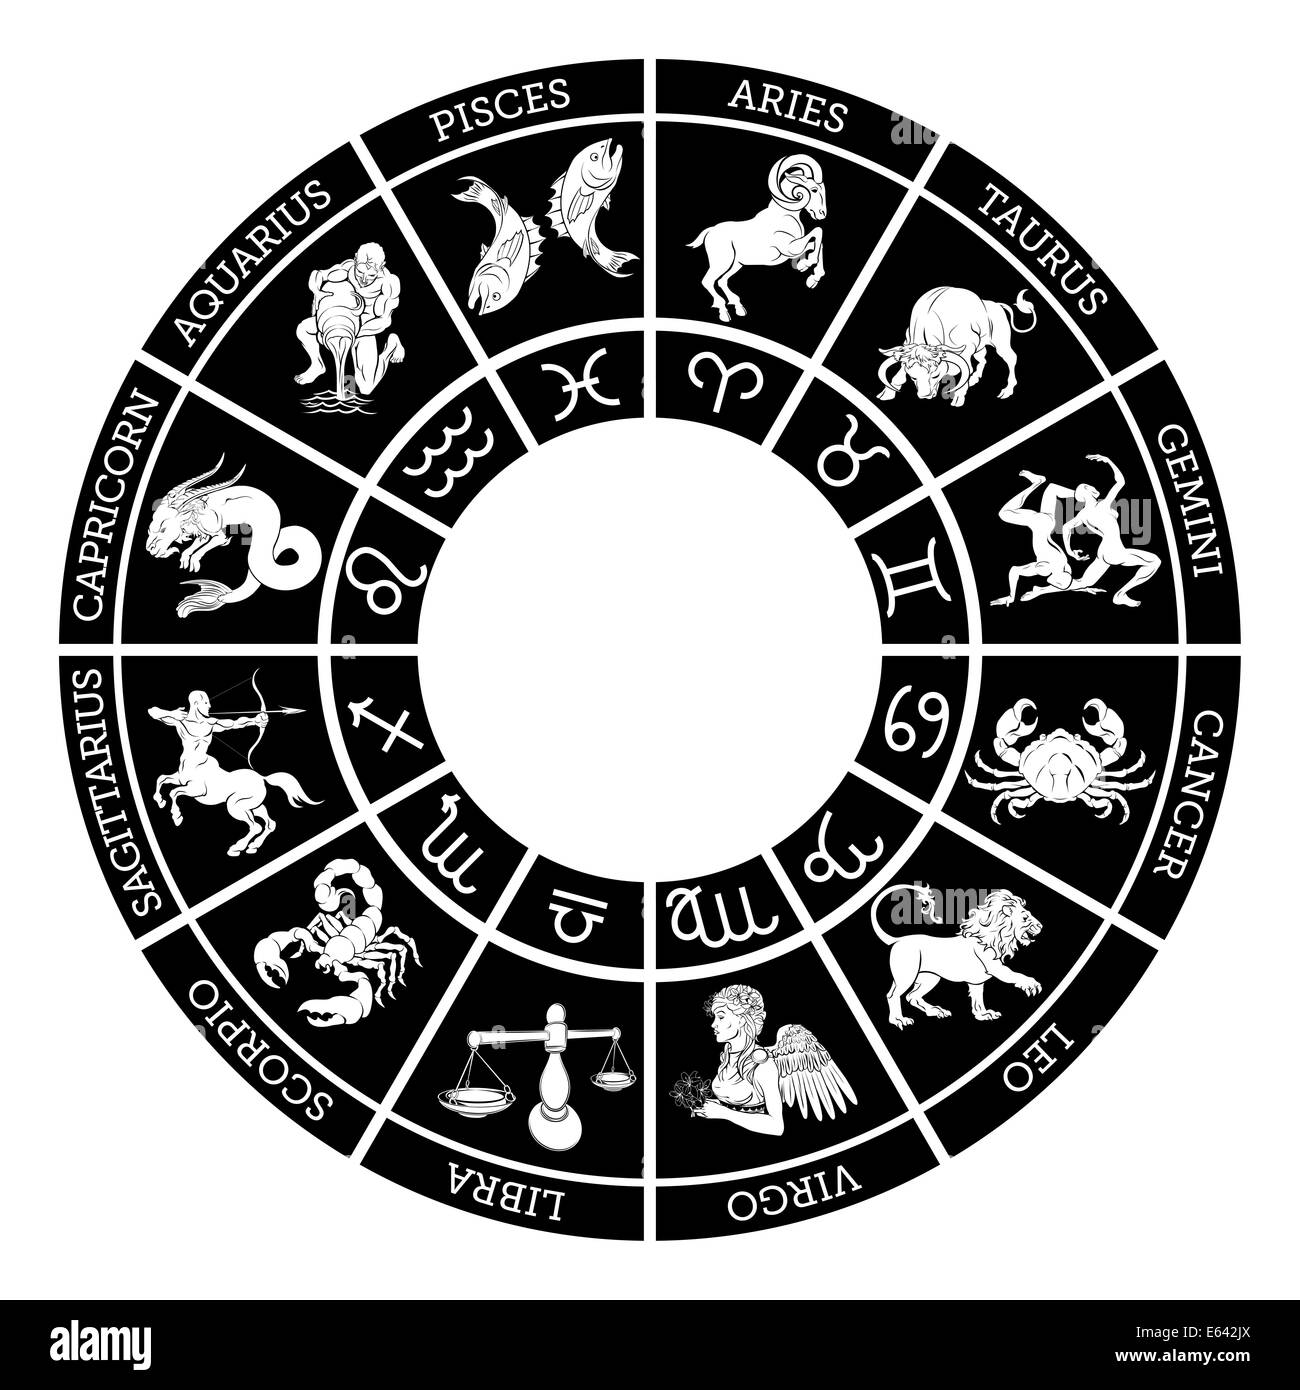 Zodiac sign icons representing the twelve signs of the zodiac for horoscopes arranged round in a circle Stock Photo